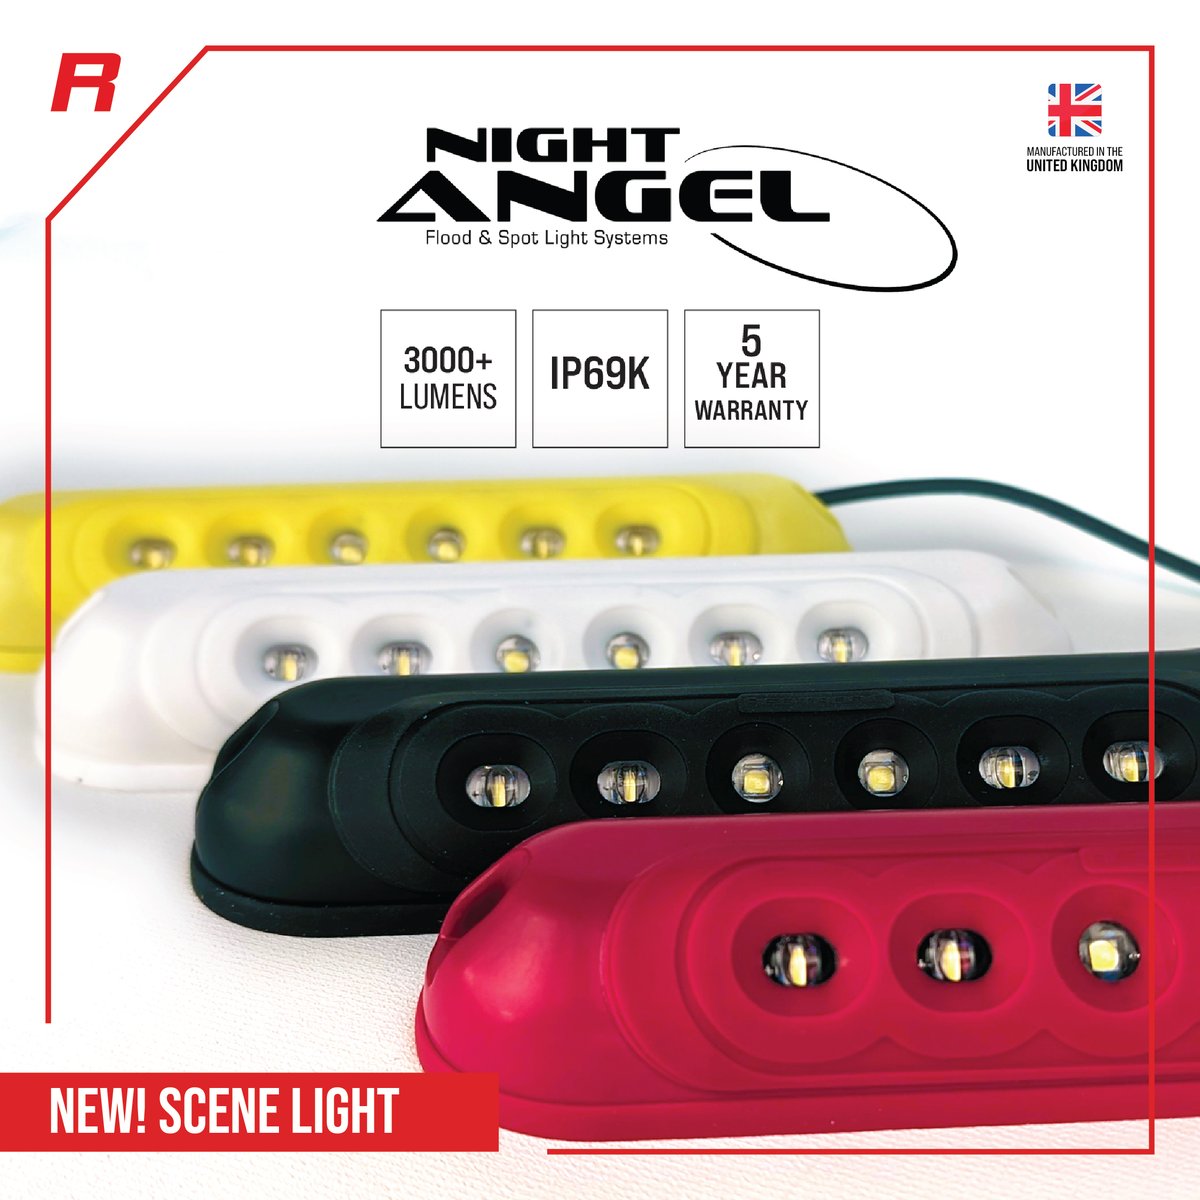 Our new Night-Angel scene-light is available now in black, white, red, and yellow! This compact product has an impressive 3000+ lumen output! With a stylish modern look, and a 5-year warranty, these lights are the perfect choice safety vehicles! #scenelight